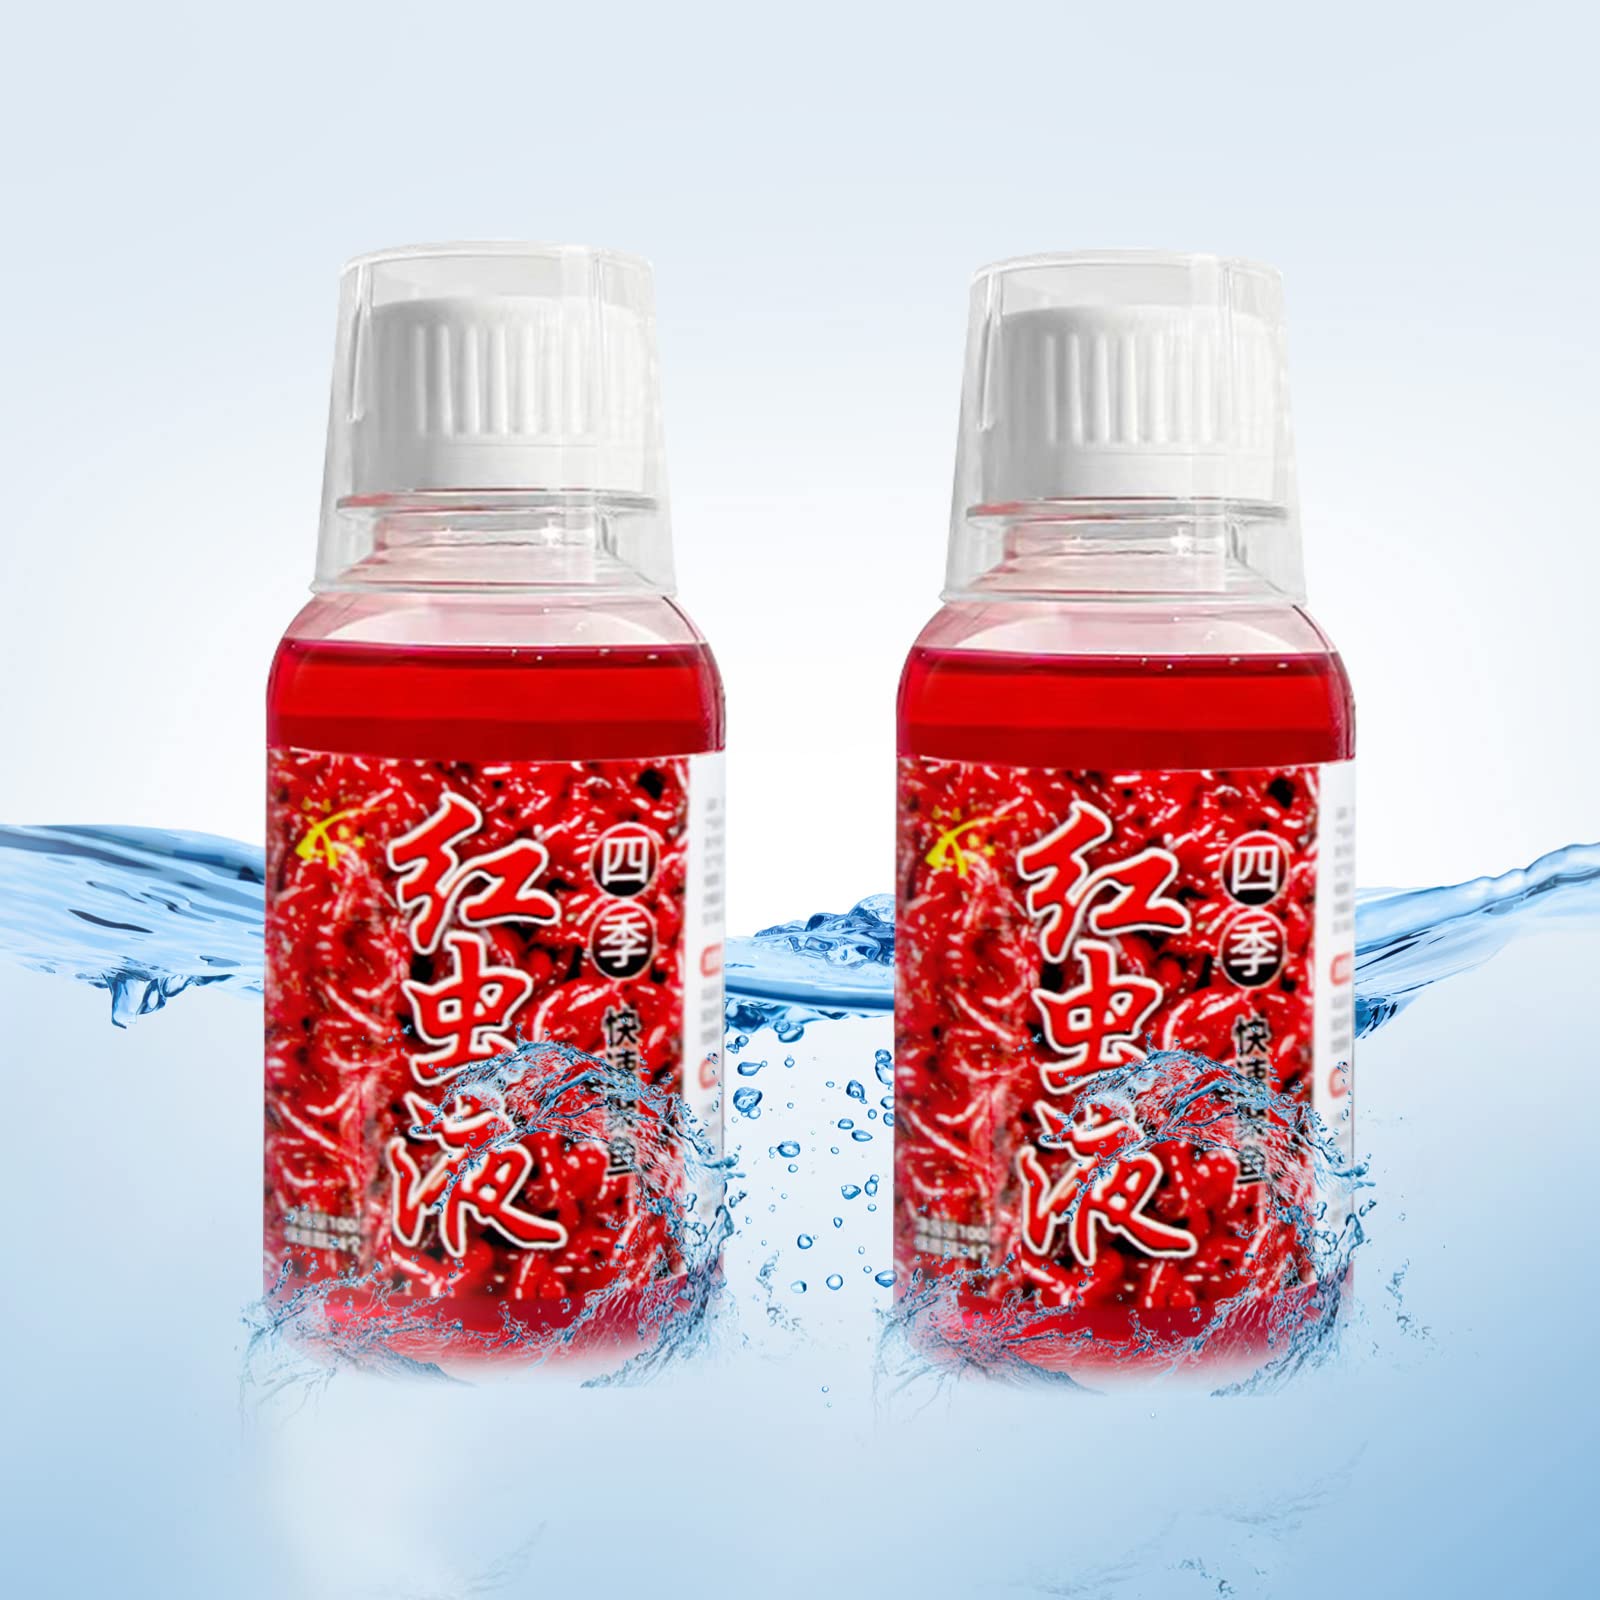 Red Worm Liquid Concentrated Red Worm Liquid Fishing Bait Fish